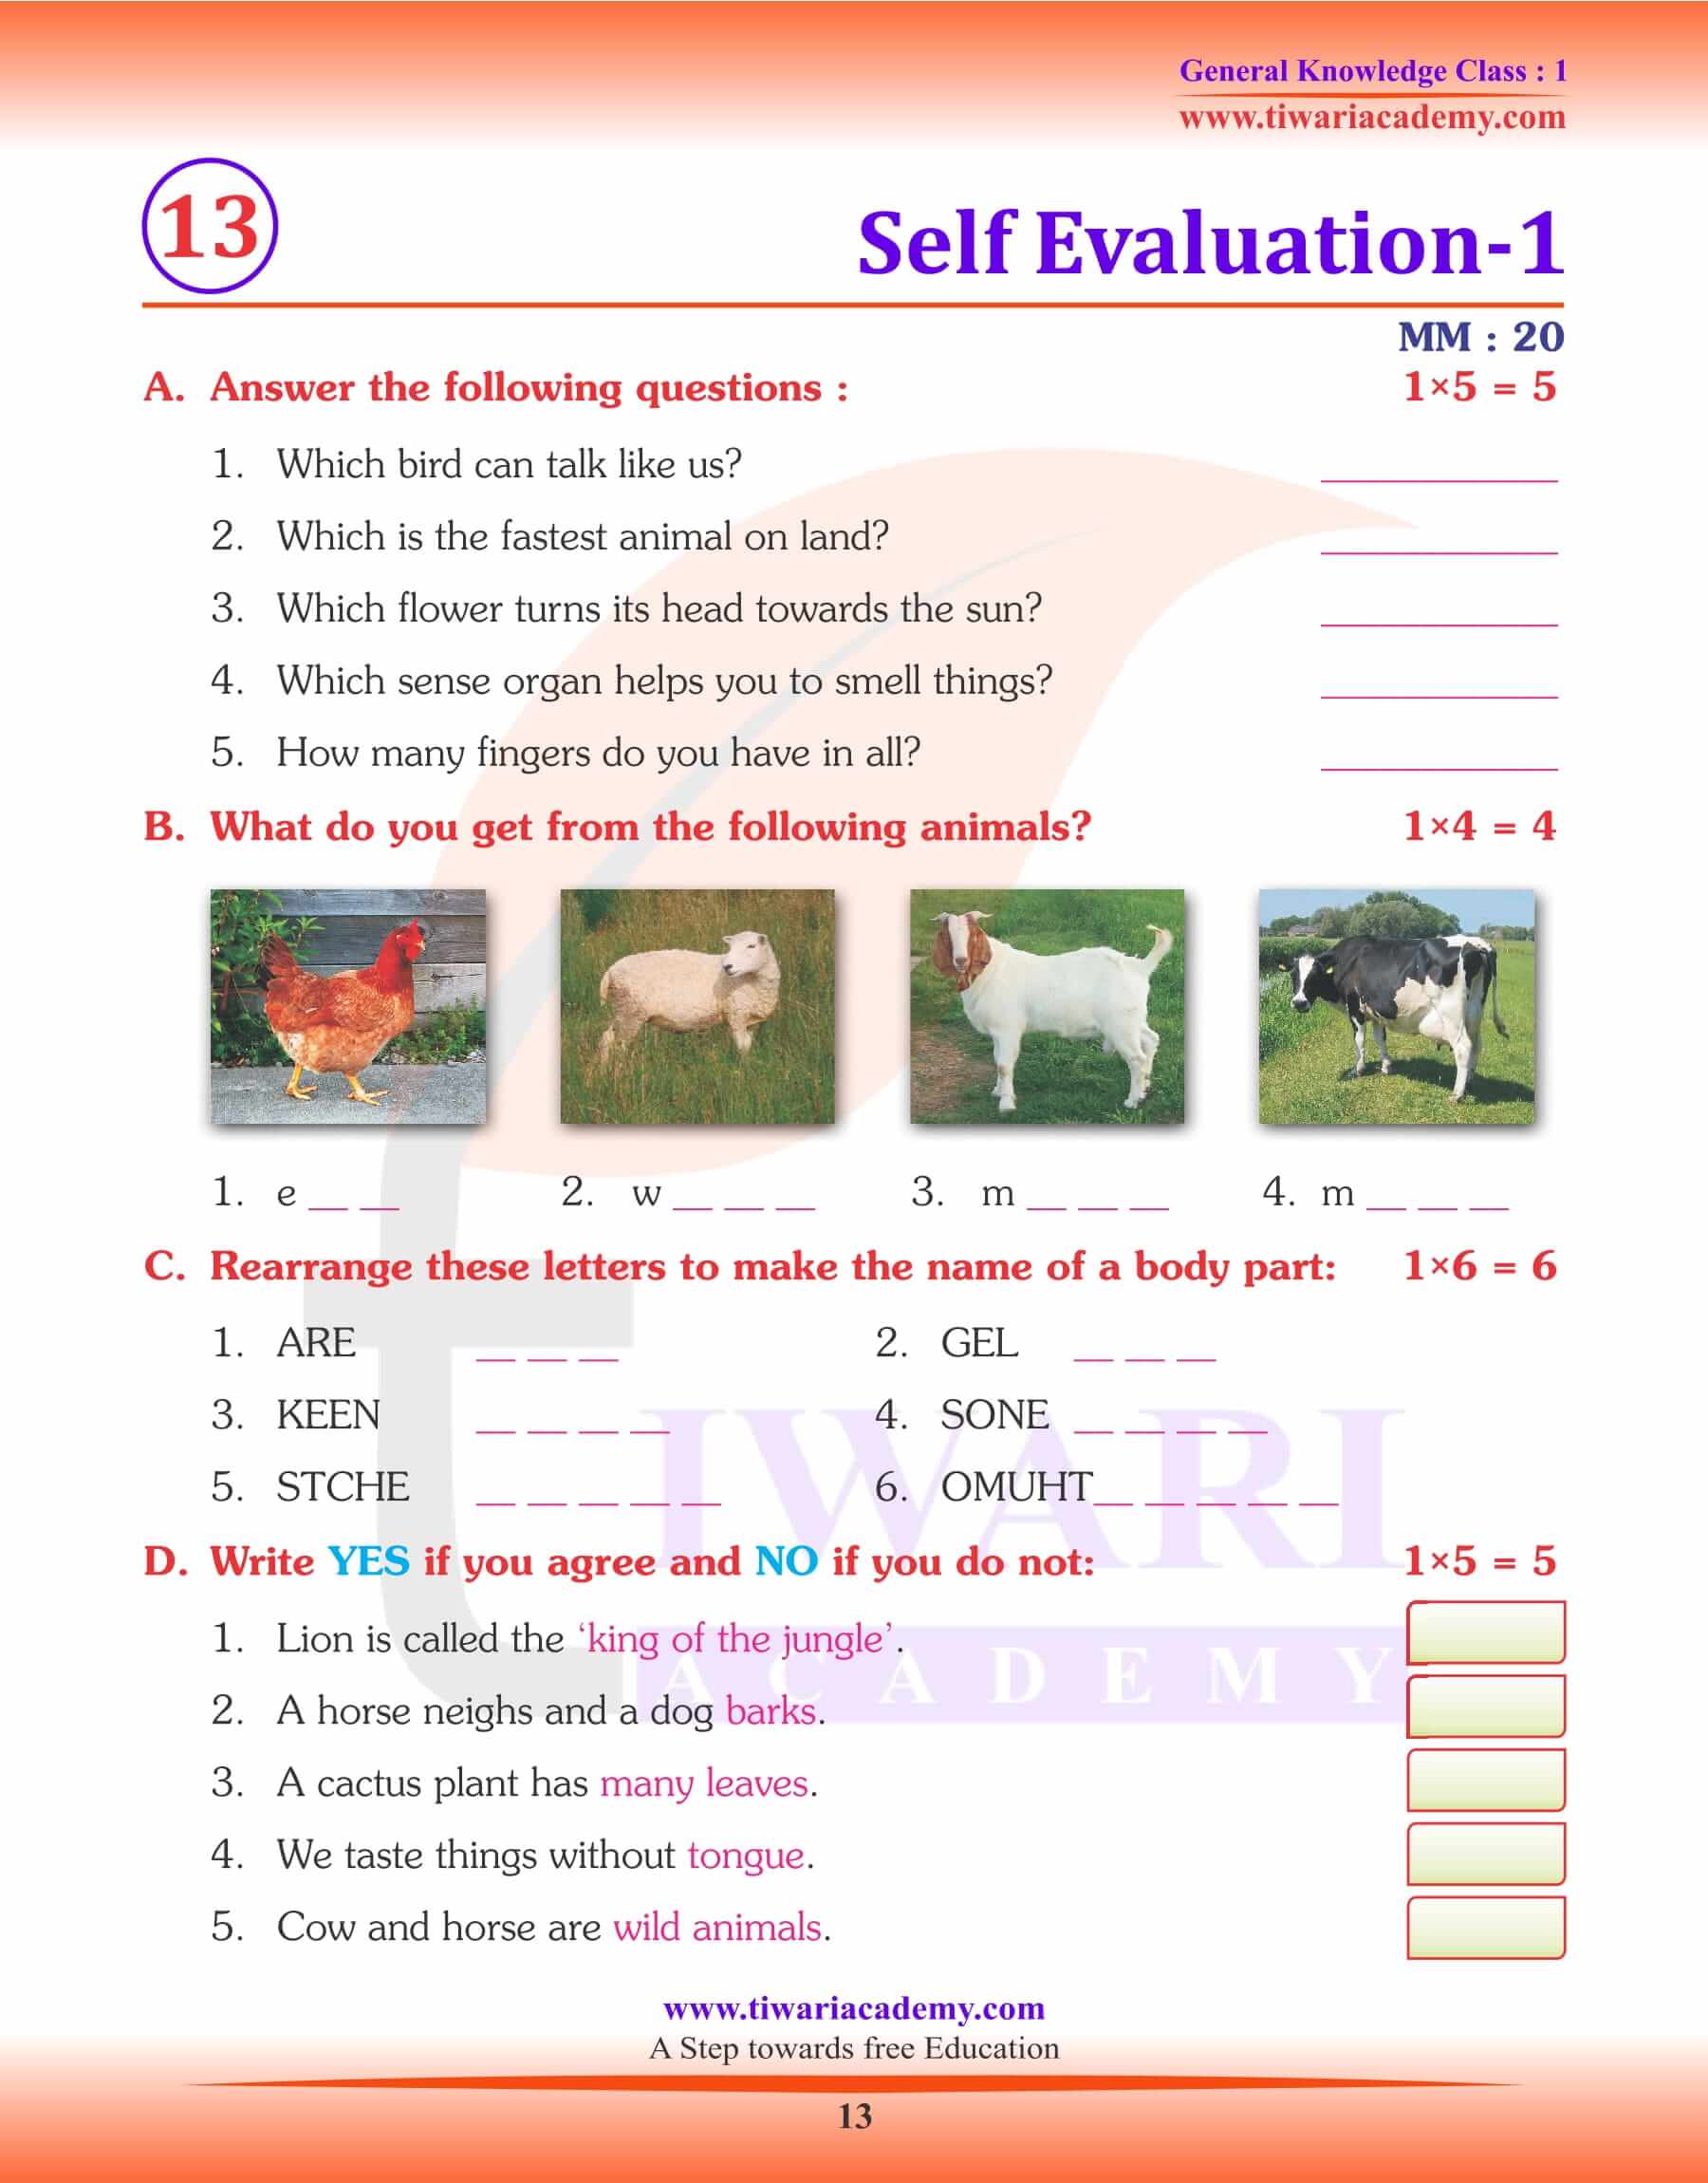 Class 1 GK General Knowledge Questions and Answers Book PDF